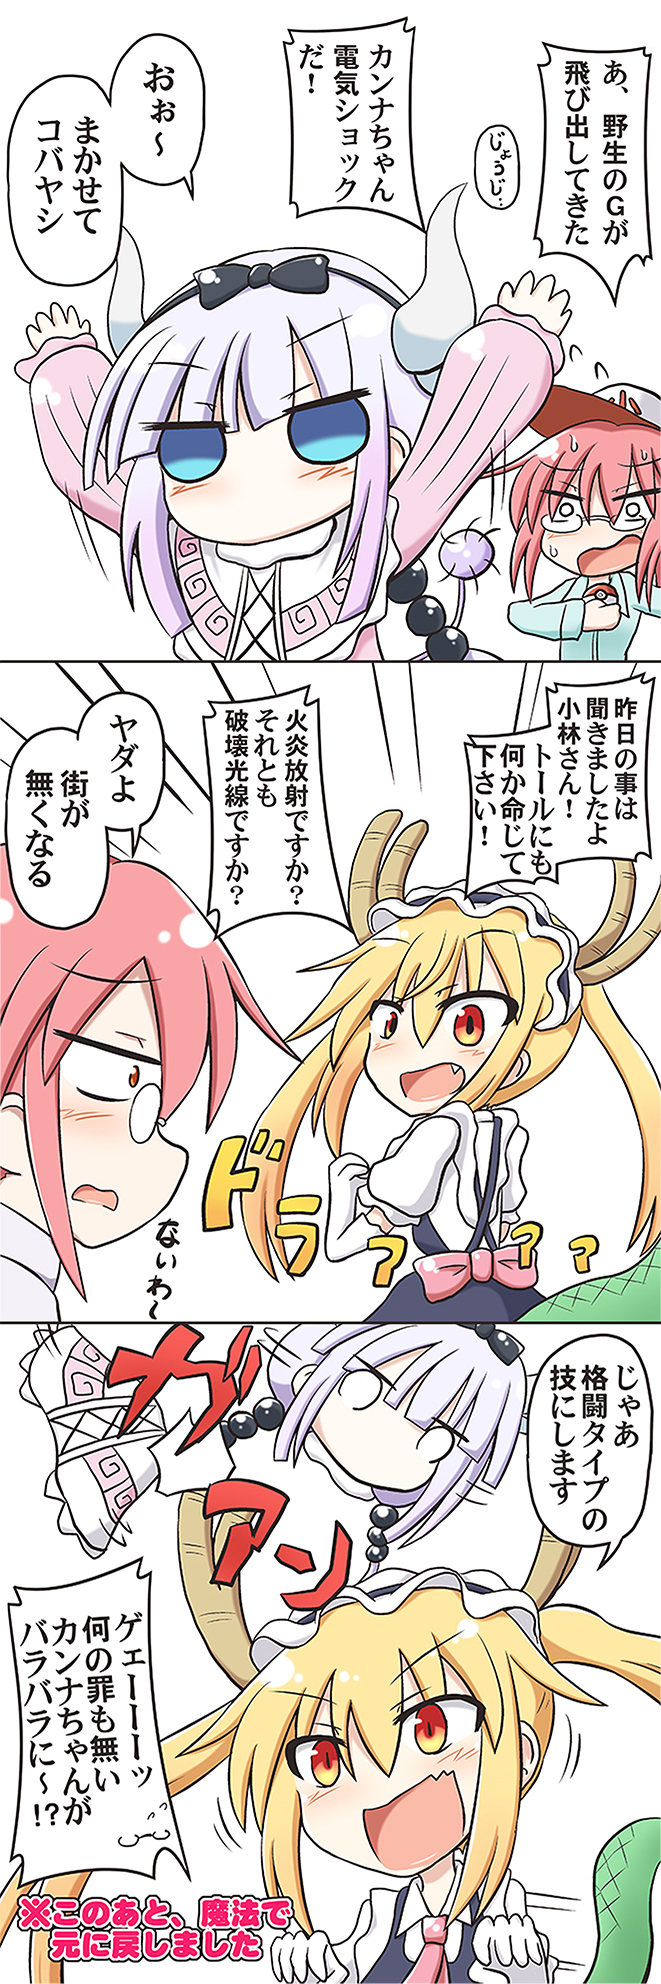 3girls 3koma arms_up bangs blonde_hair blue_eyes blush comic commentary_request dragon_girl dragon_horns dragon_tail glasses hair_ornament hairband highres horns kanna_kamui kasaneko kinnikuman kobayashi-san_chi_no_maidragon kobayashi_(maidragon) long_hair long_sleeves looking_at_viewer multicolored_hair multiple_girls open_mouth parody poke_ball pokemon red_eyes redhead speech_bubble tail tooru_(maidragon) translation_request twintails